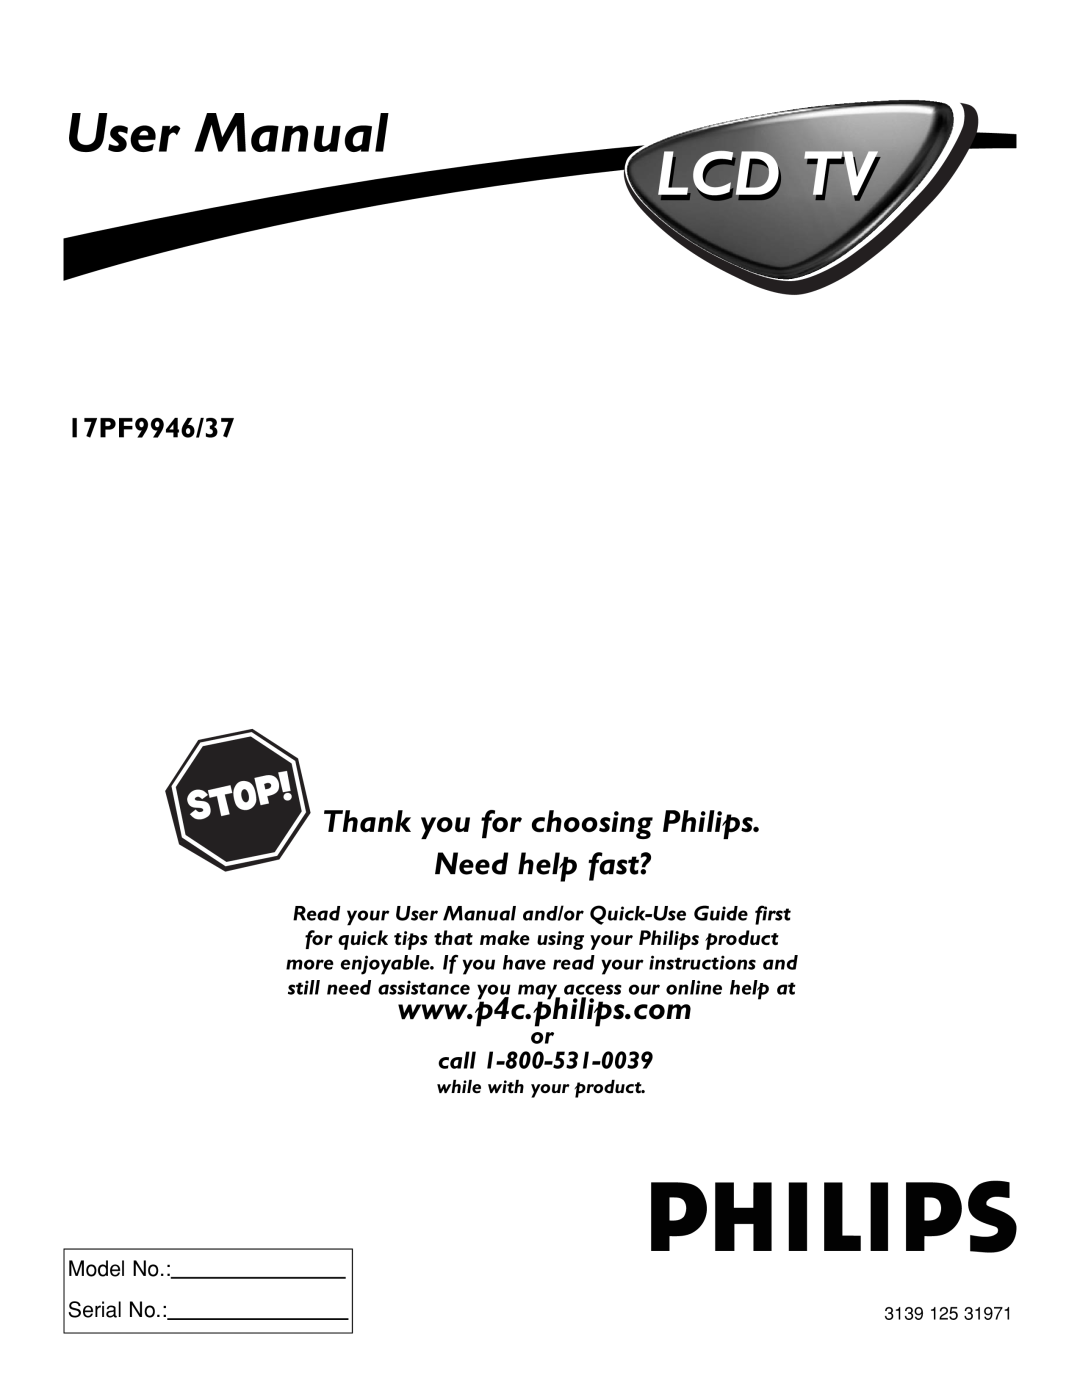 Philips 17PF9946/37 user manual Lcd Tv, Thank you for choosing Philips Need help fast?, or call, Model No Serial No, 3139 